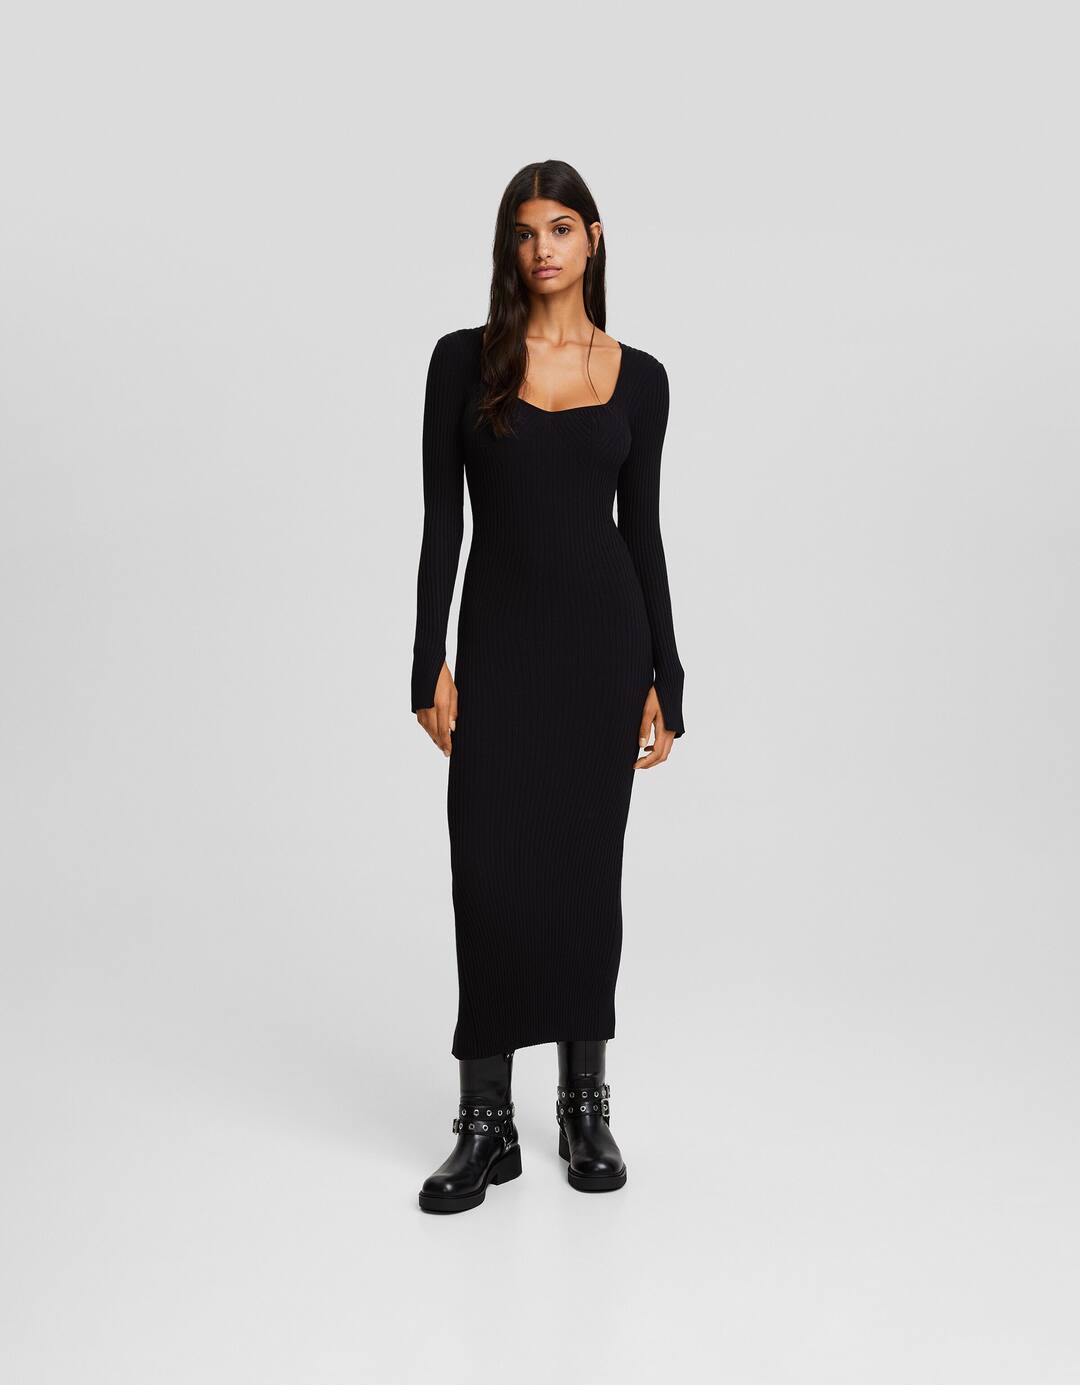 Midi dress with long sleeves and sweetheart knit neckline